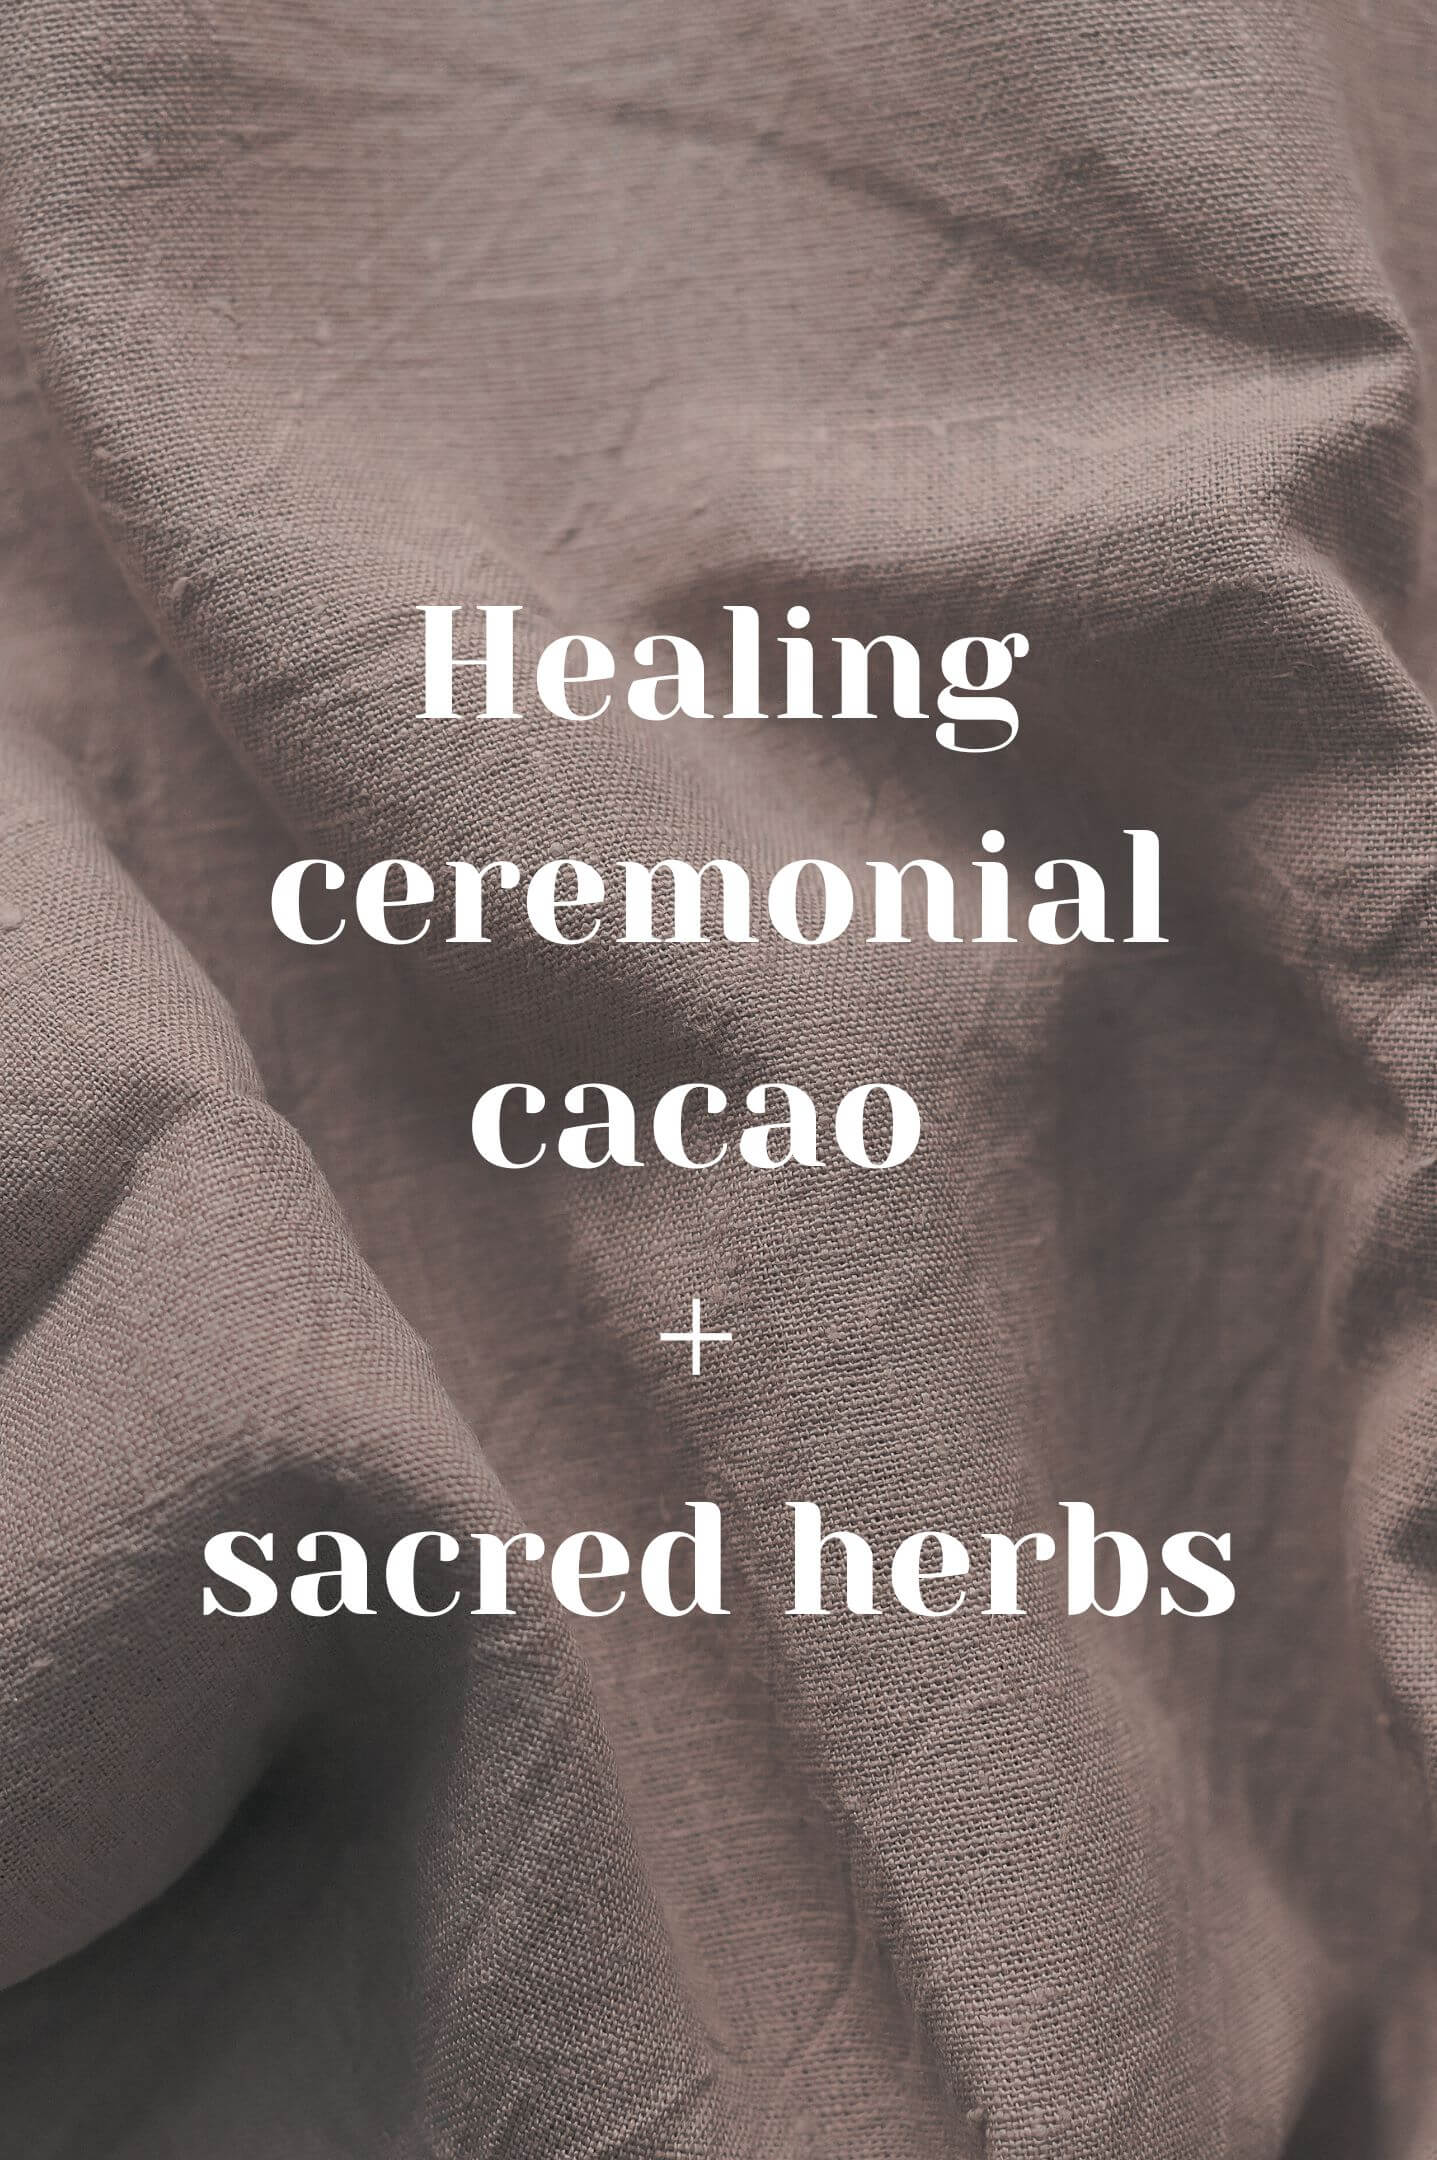 Bespoke healing 28-day ceremonial cacao and sacred herb kits